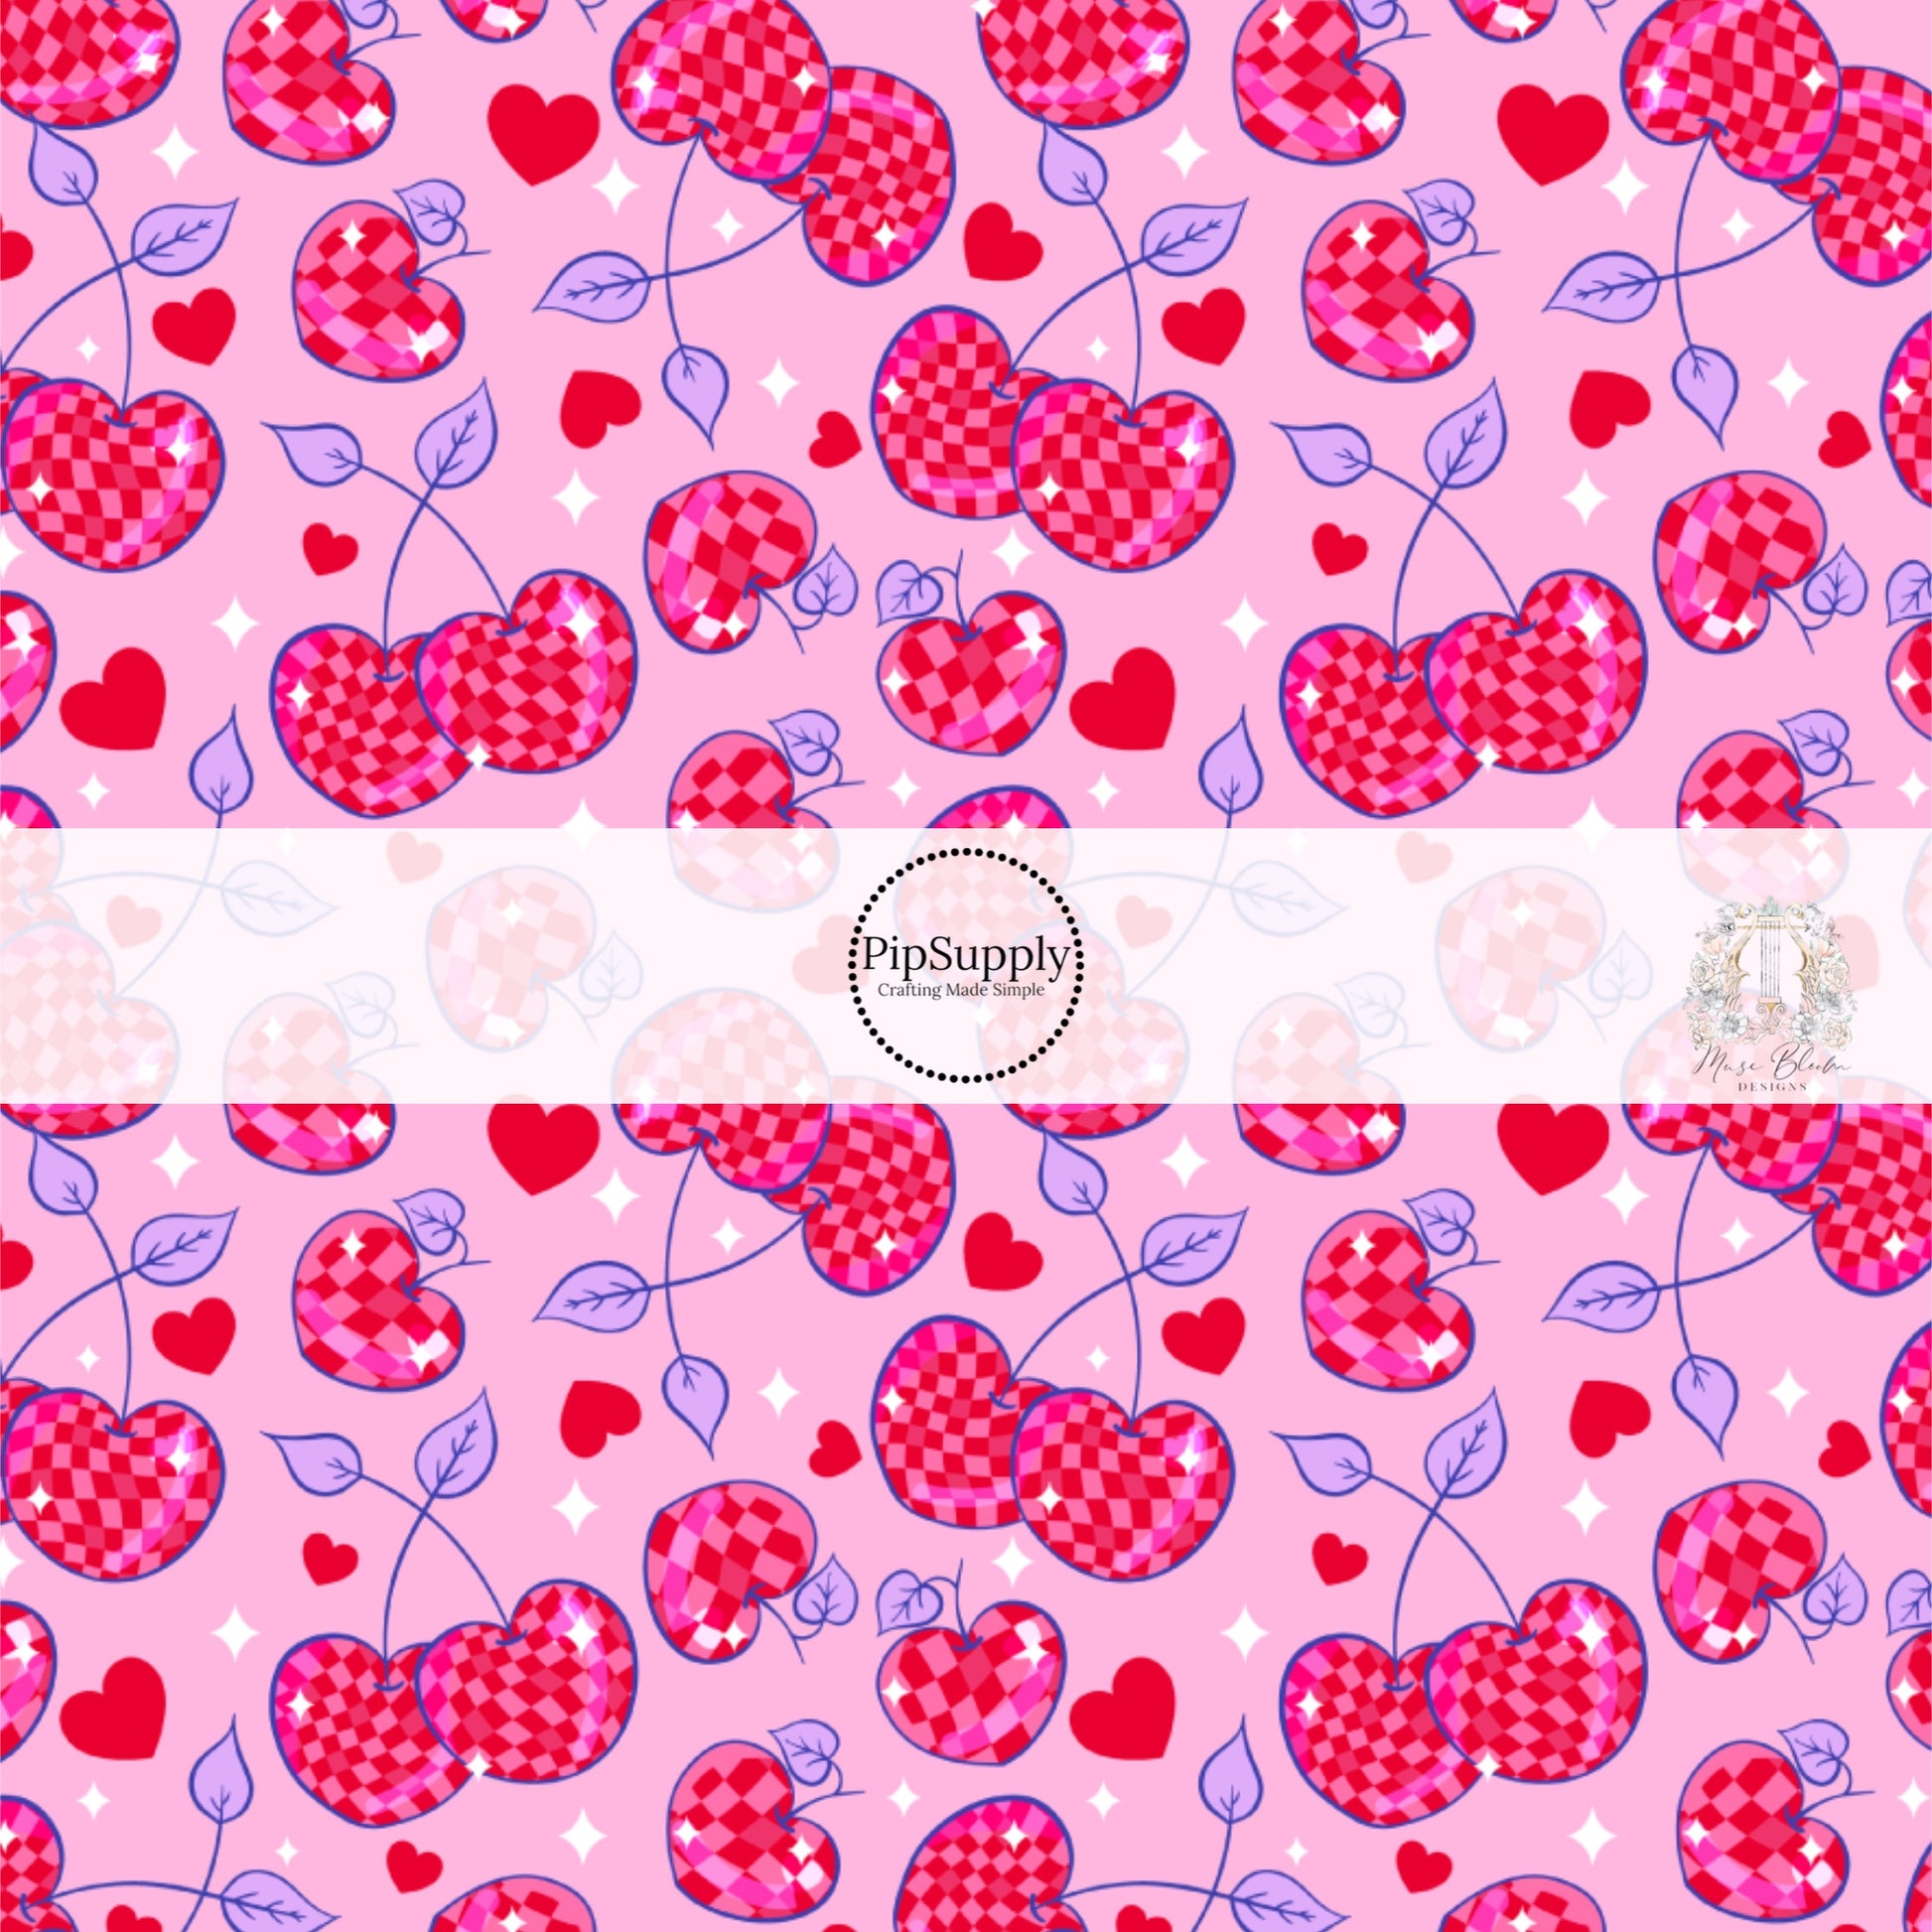 Pink and red checkered cherries with purple stems and red hearts on a pink bow strip